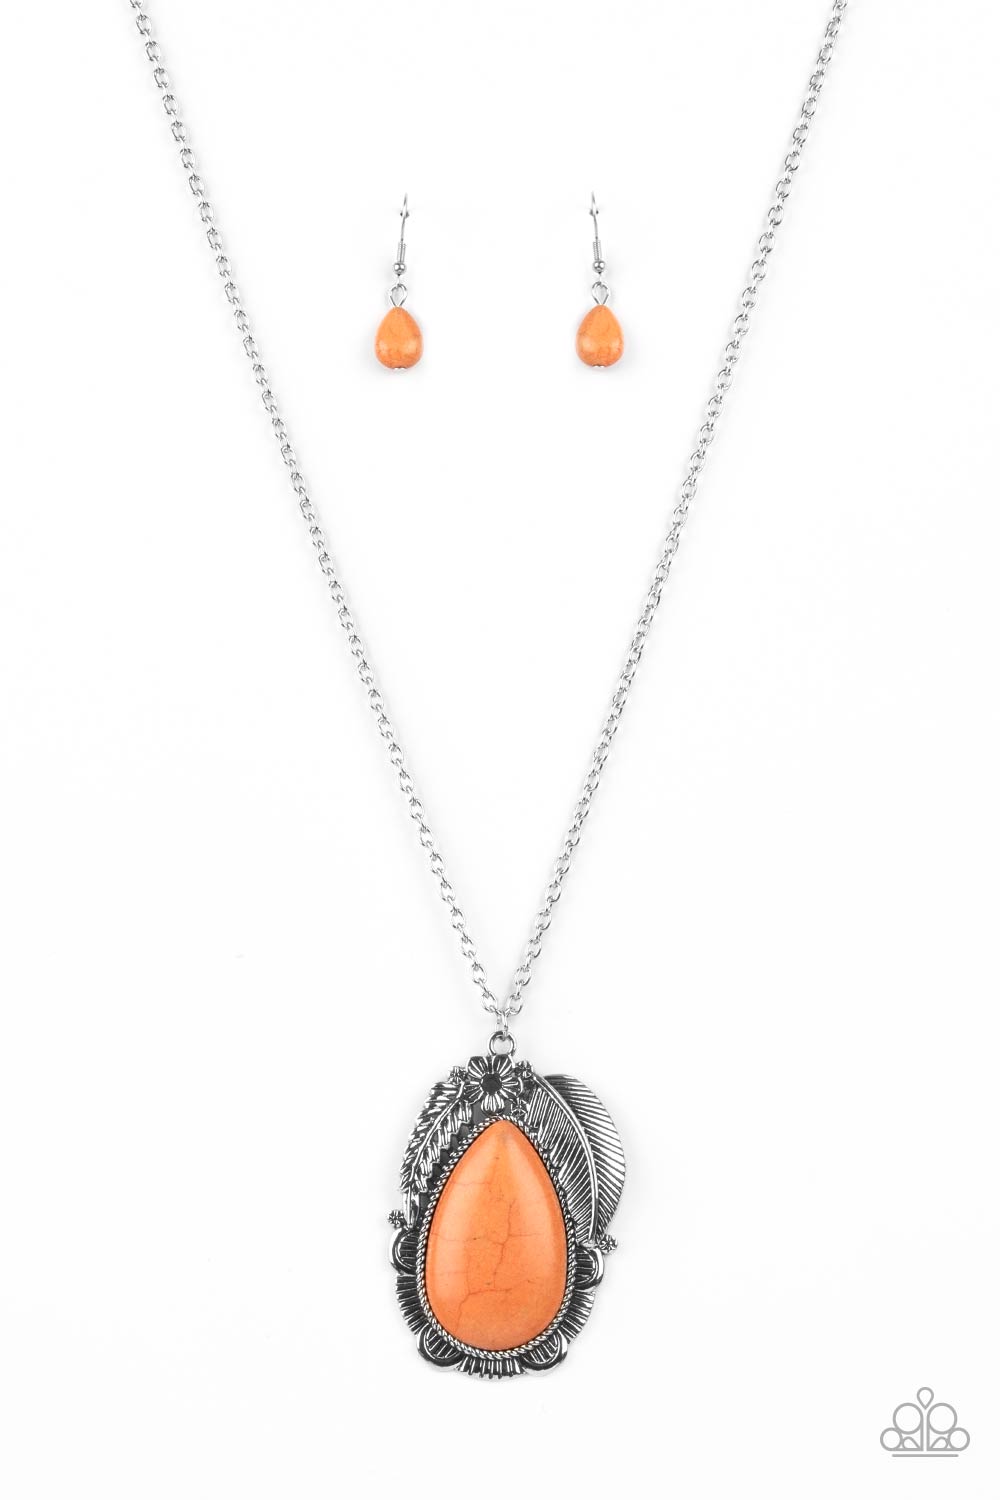 Tropical Mirage Orange Stone Necklace - Paparazzi Accessories- lightbox - CarasShop.com - $5 Jewelry by Cara Jewels